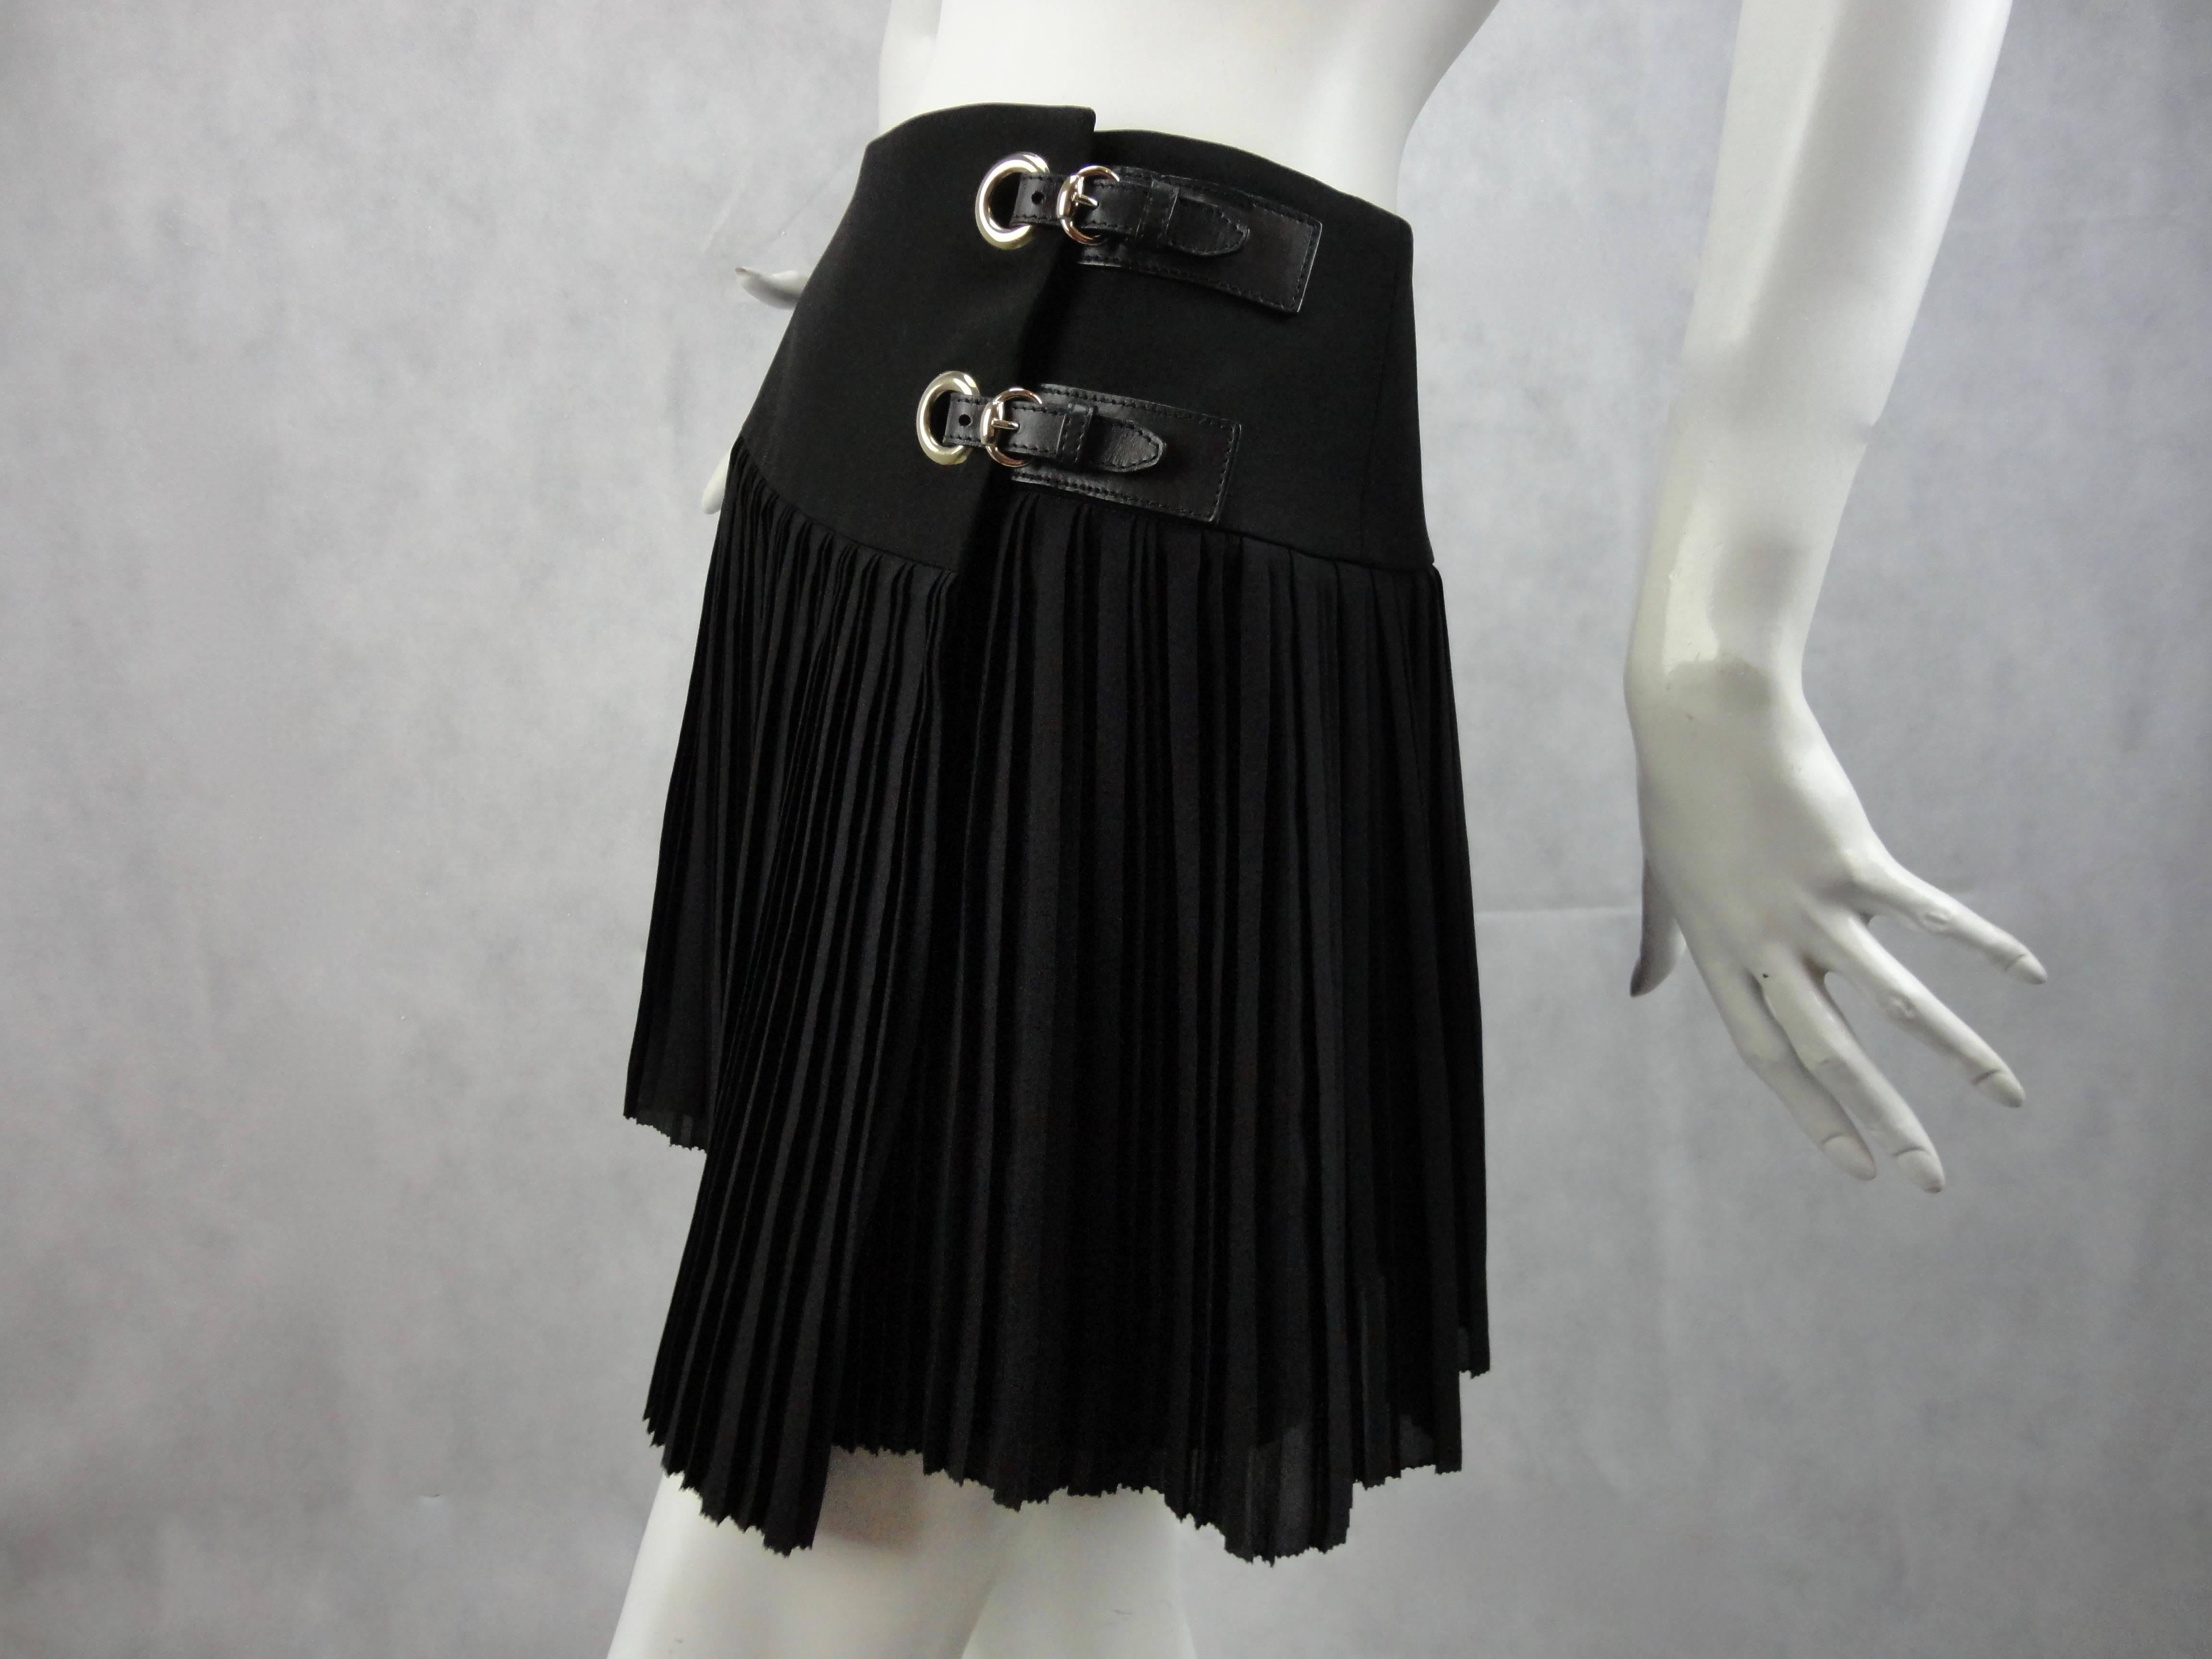 Black Gucci pleated skirt with leather buckle details.
Mint condition.